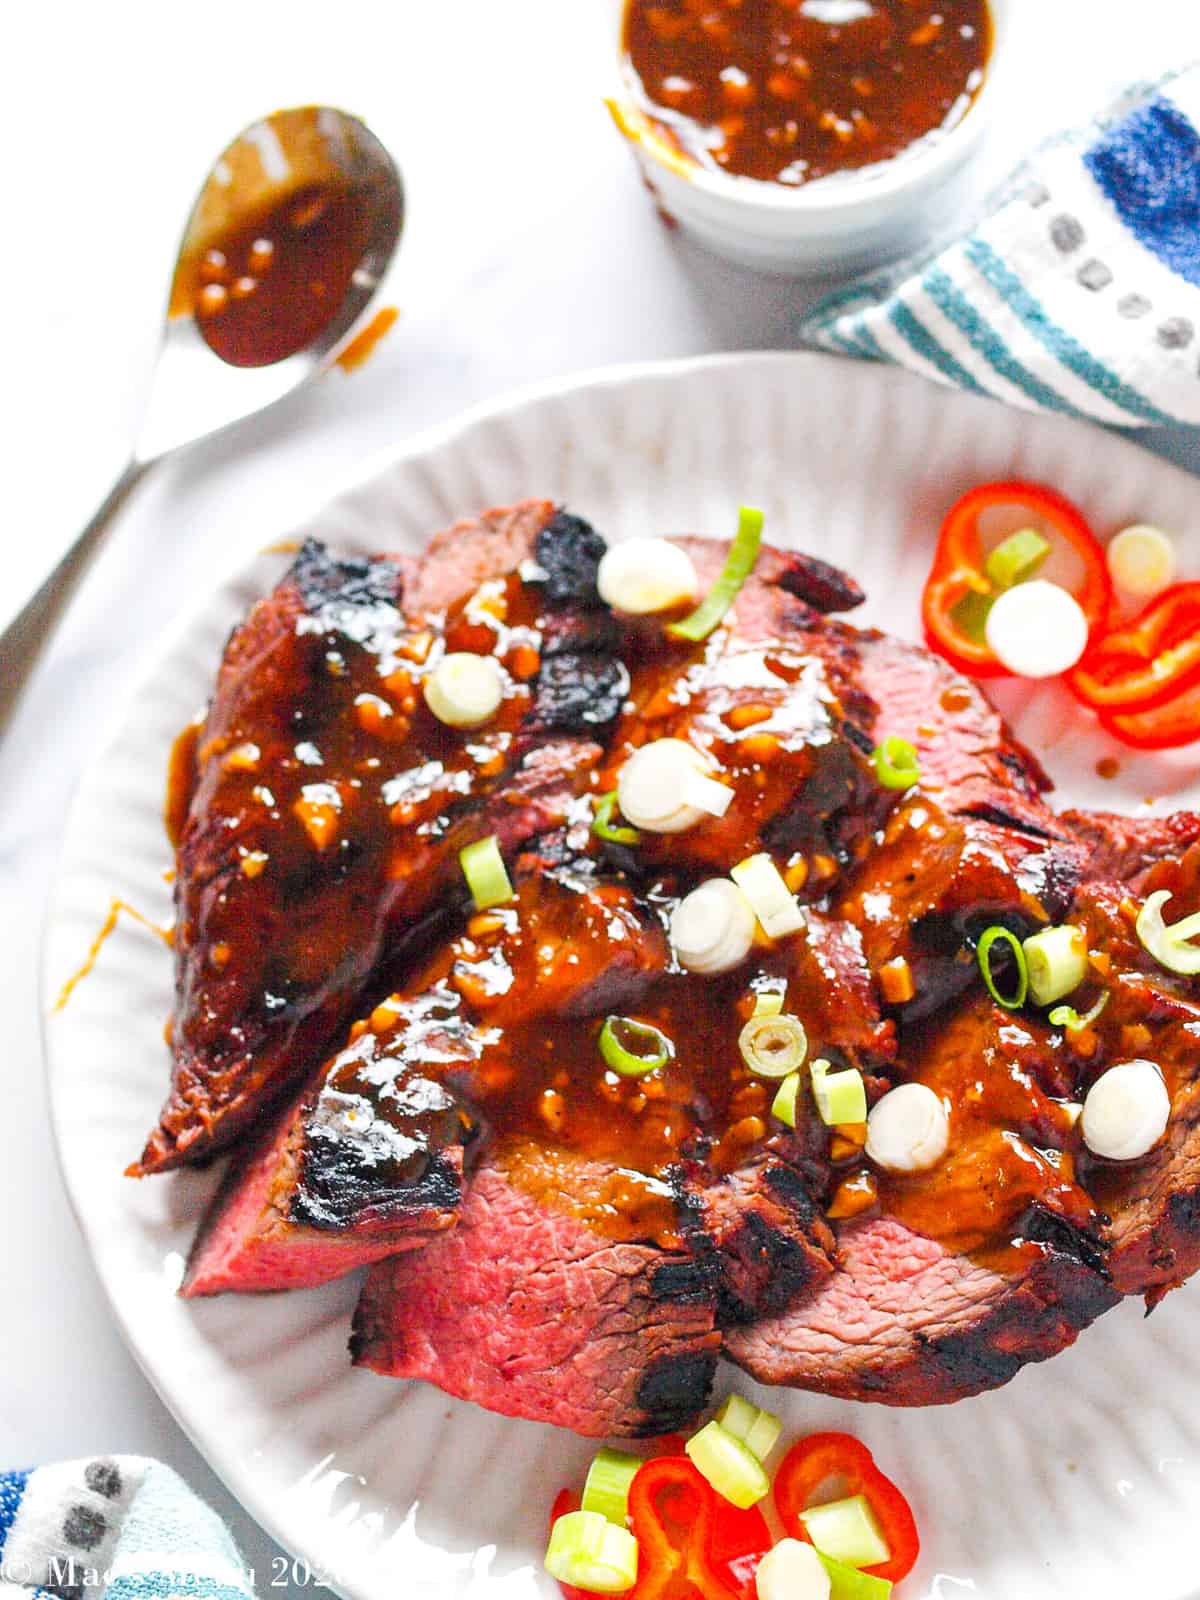 Grilled tri tip steak with marinade sauce on top.